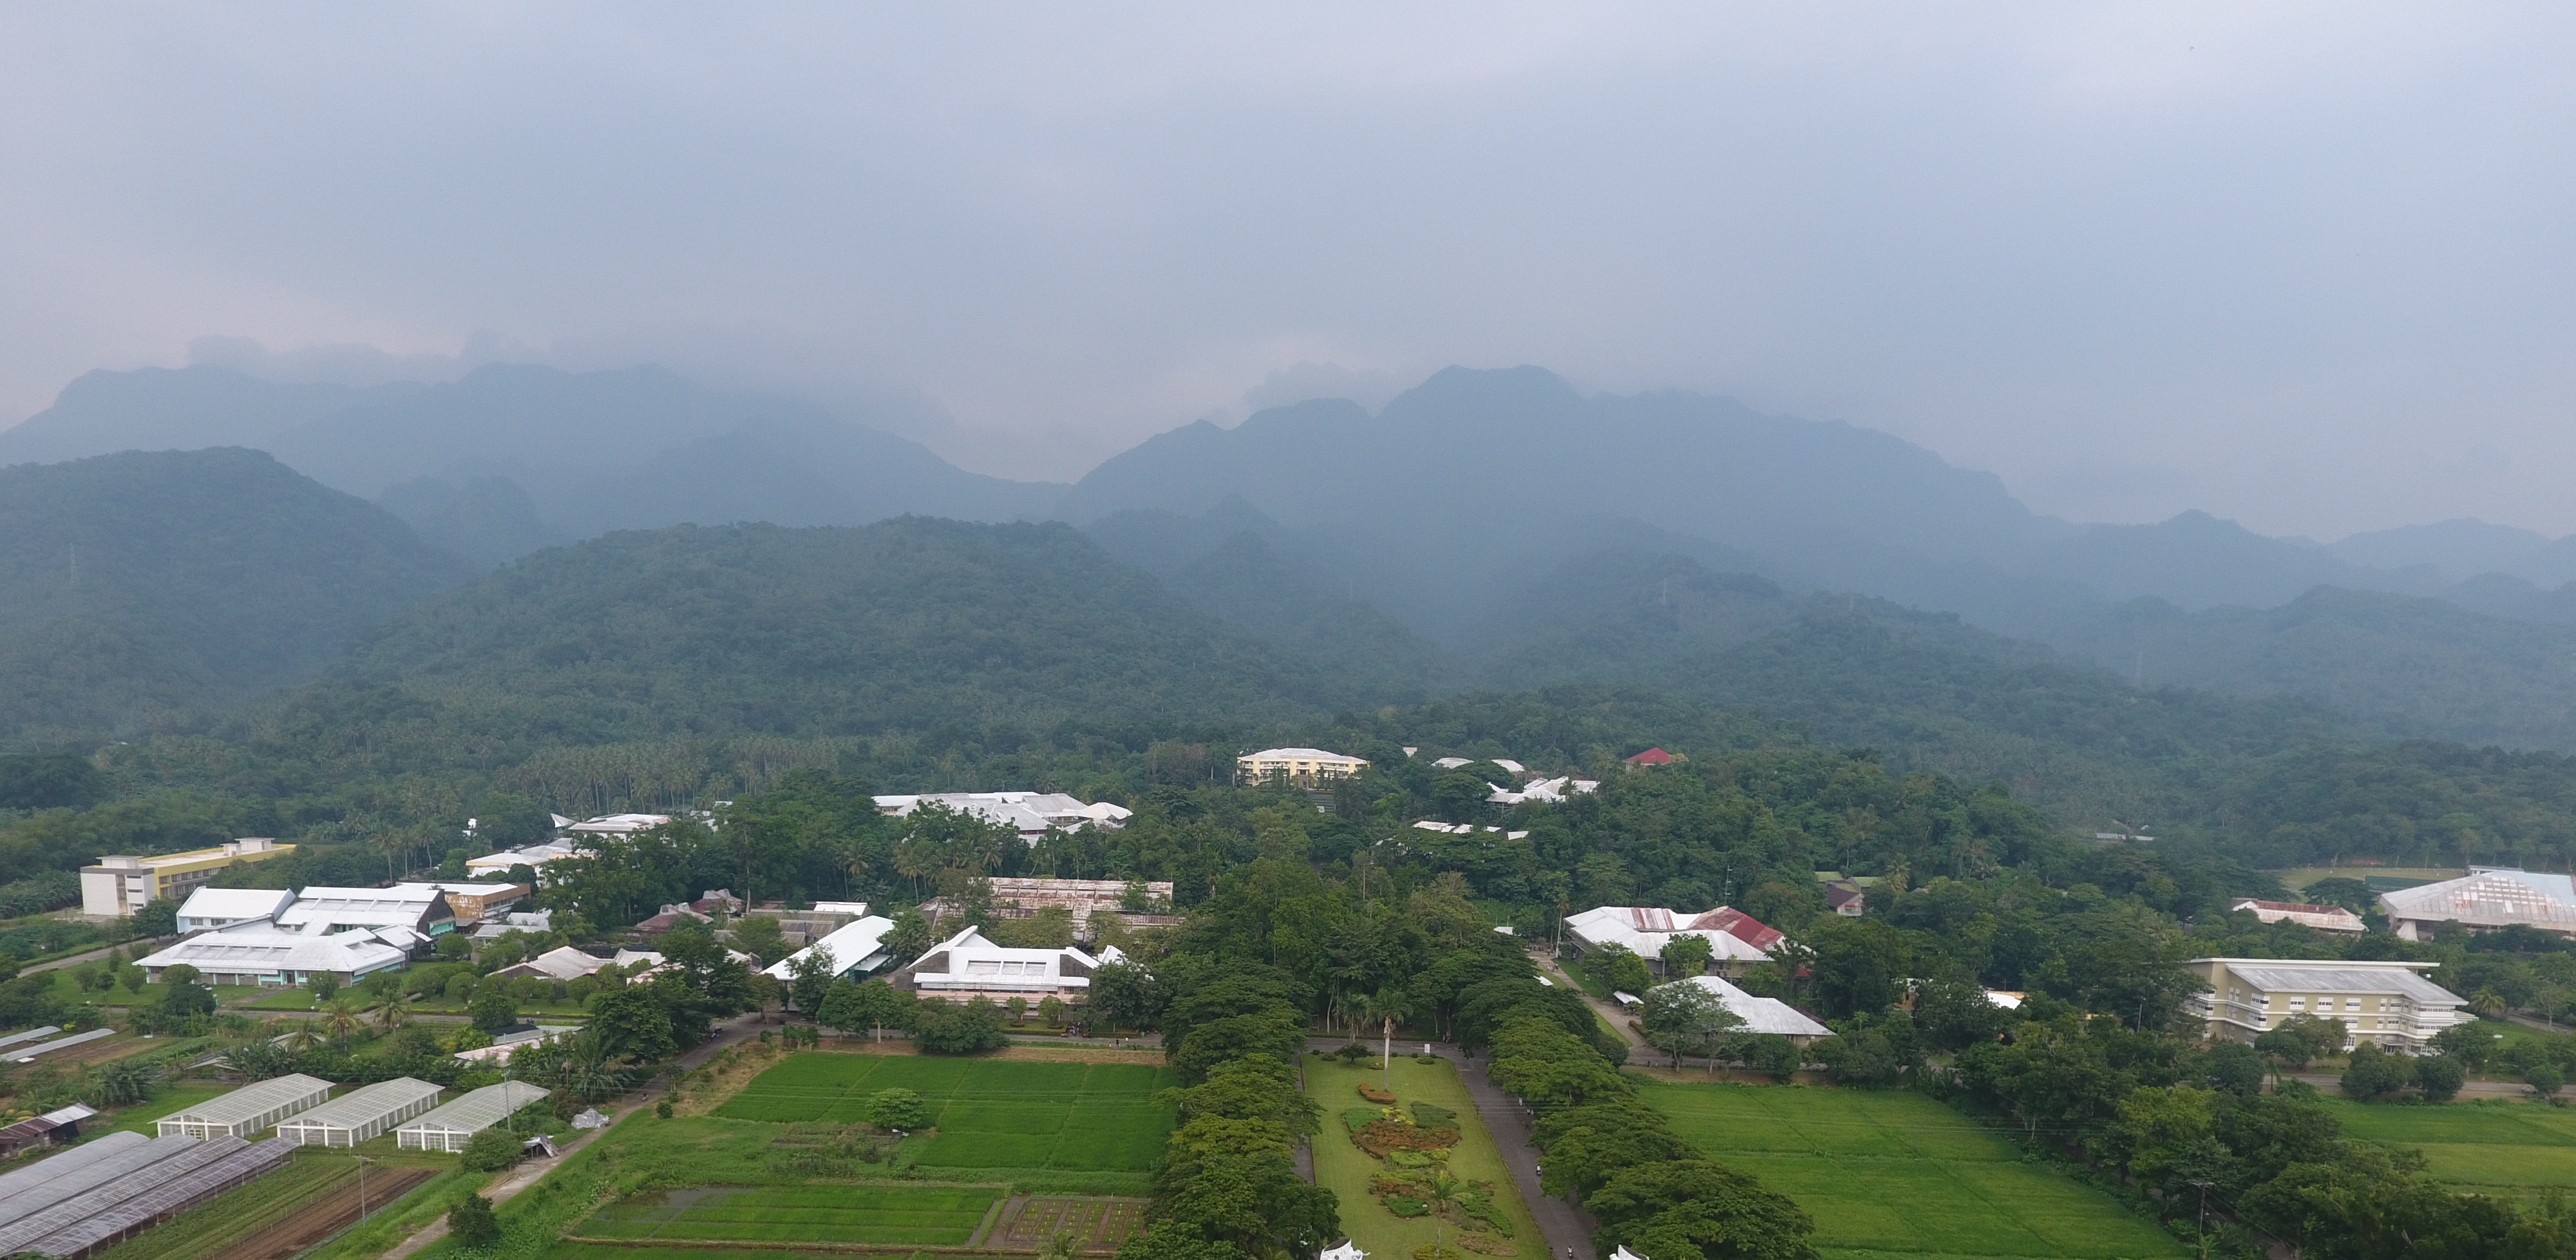 HAZY. Mt. Pangasugan obscured from clear sight by thick haze. Photo by Jed Asaph Cortes